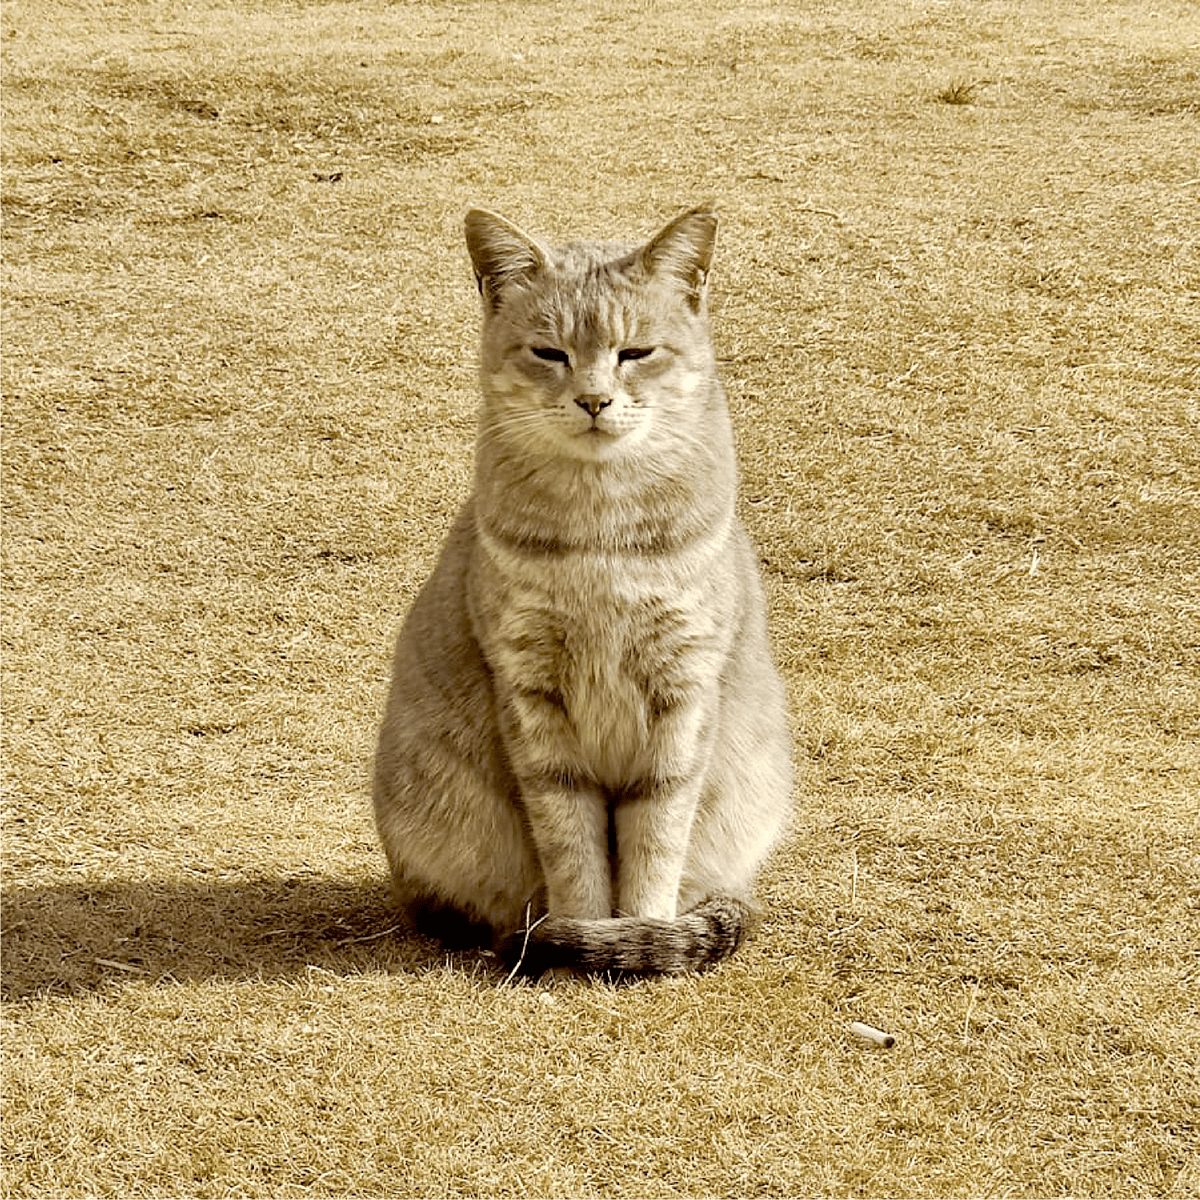 chill chubby grass Kashmir pointy ears poised pose sleepy cat tail wild cat